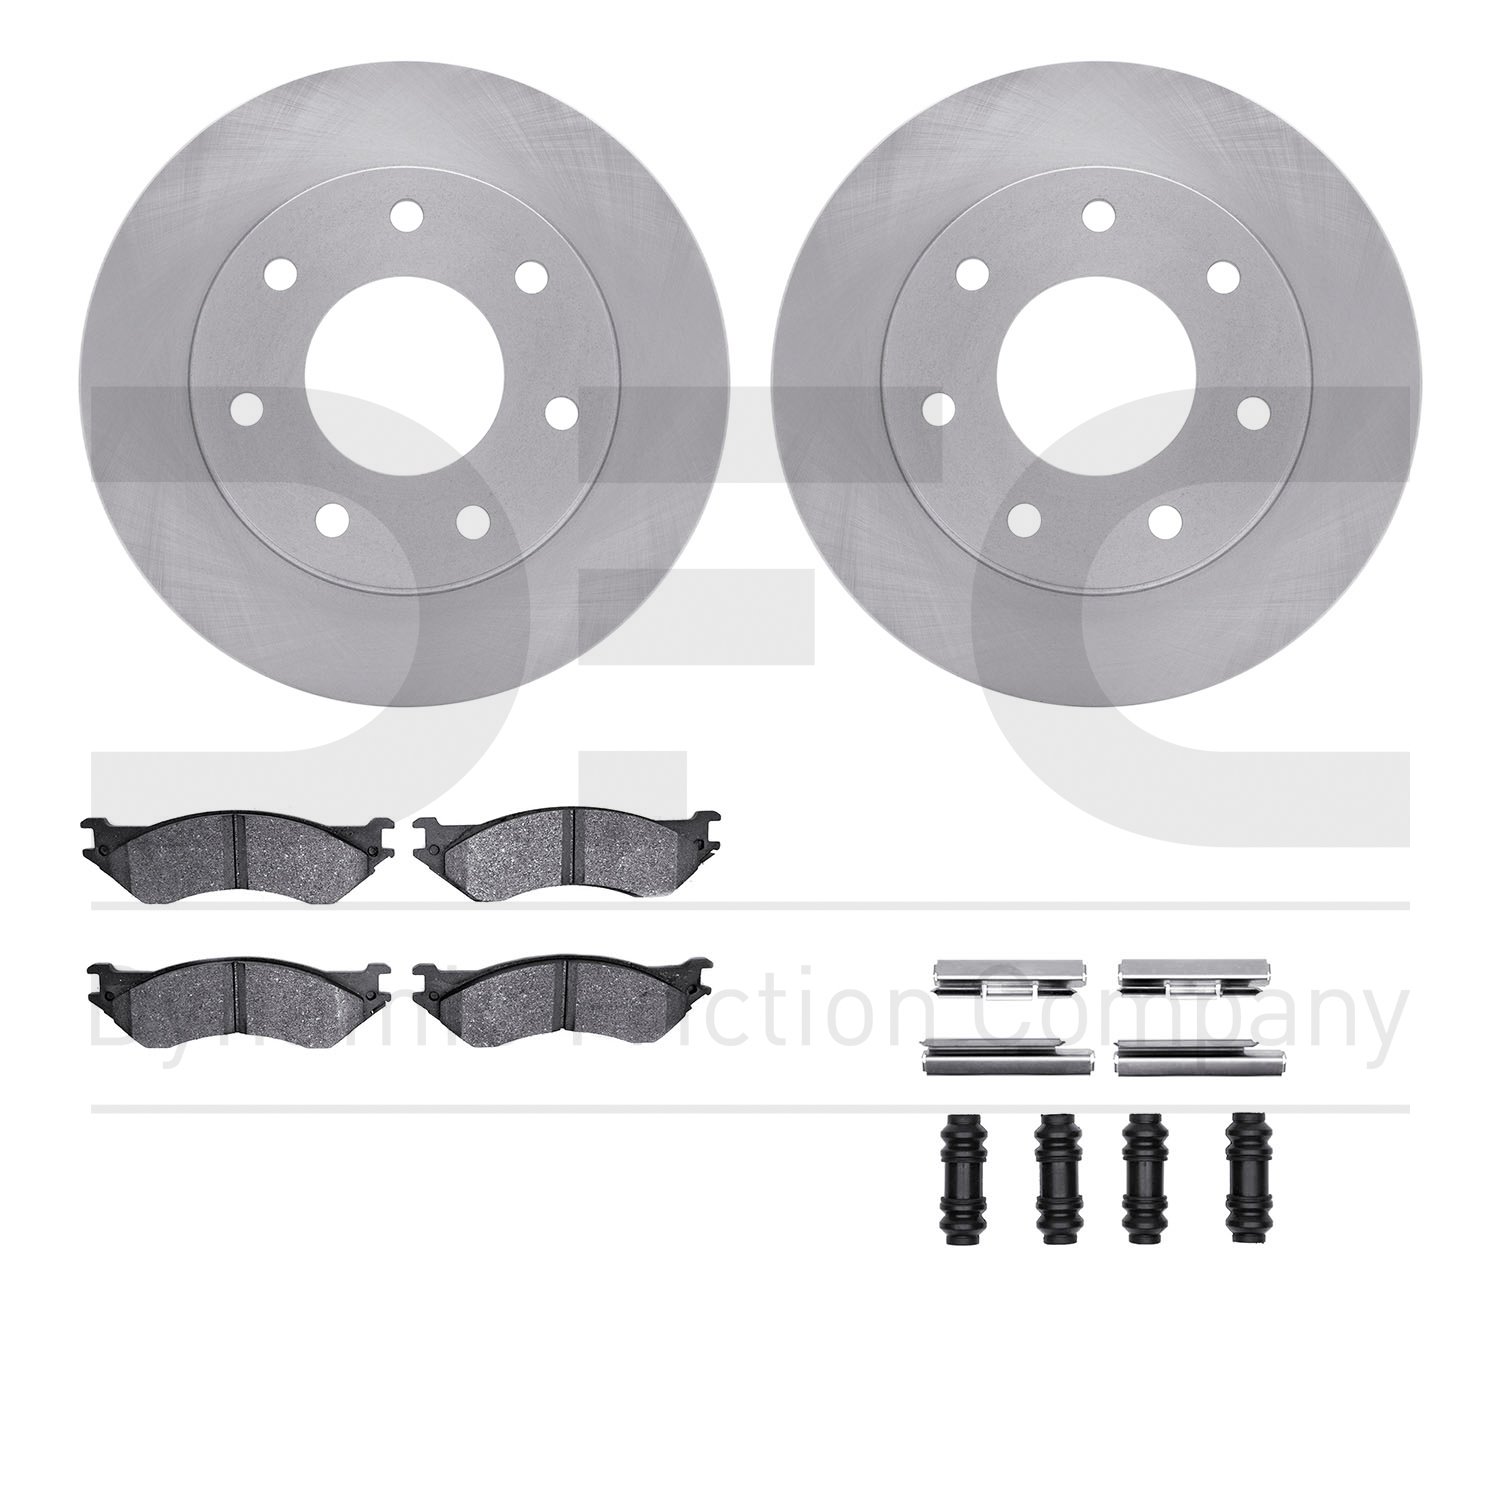 6412-54110 Brake Rotors with Ultimate-Duty Brake Pads Kit & Hardware, 1997-2004 Ford/Lincoln/Mercury/Mazda, Position: Front